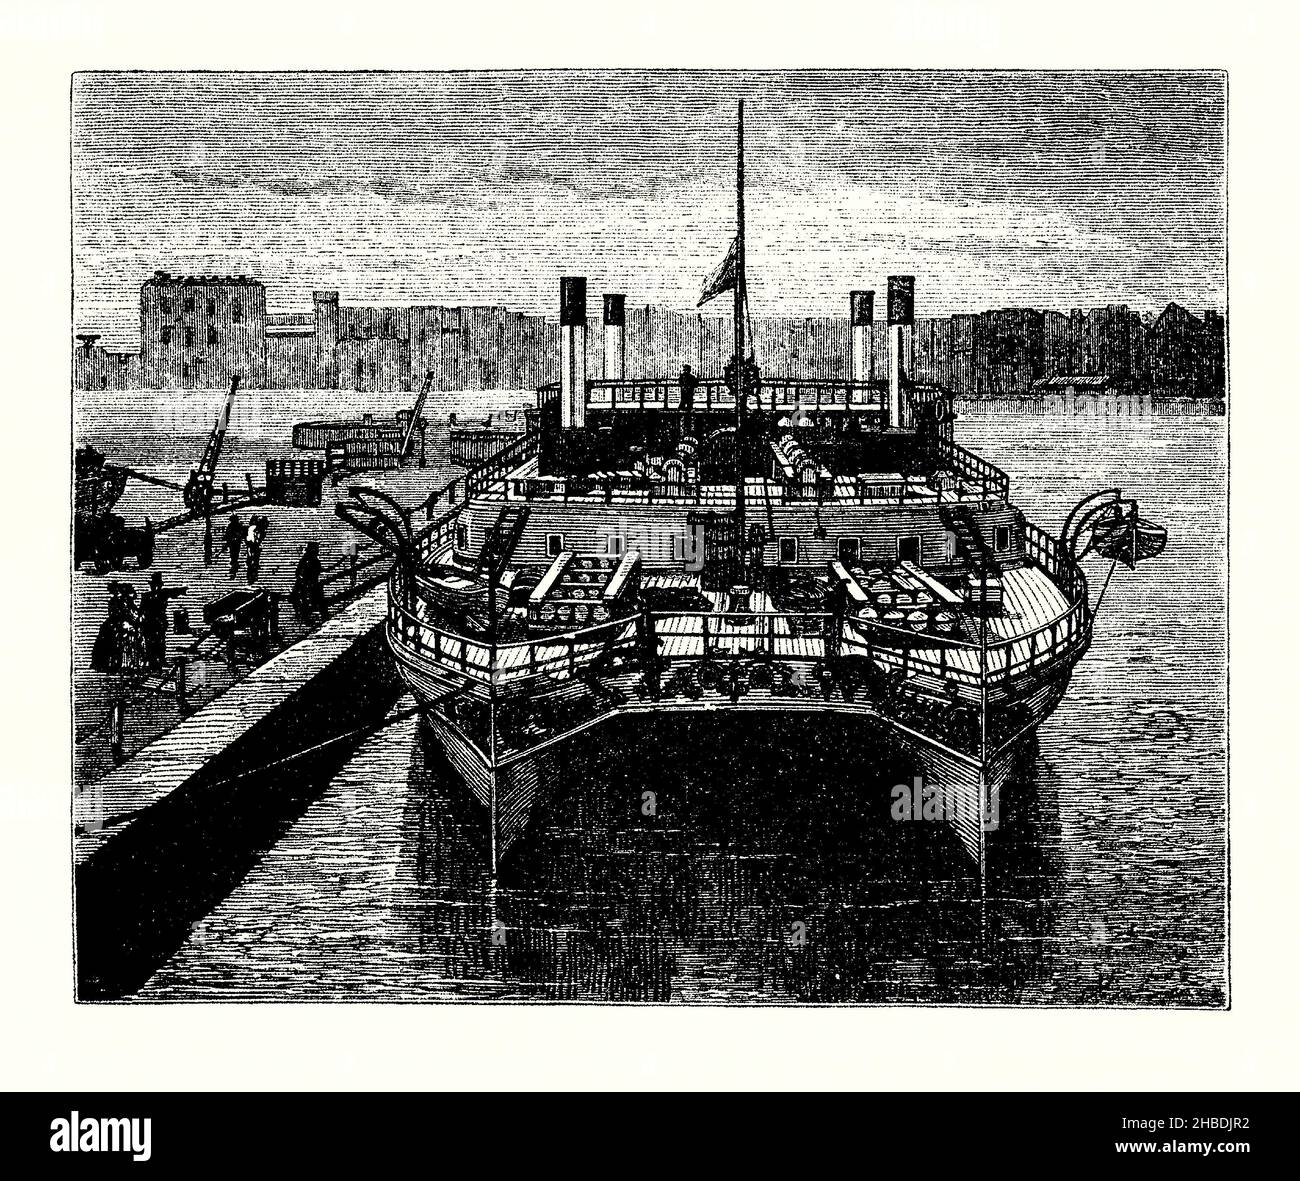 An old engraving of the unusual twin-hulled, cross-channel ship PS Castalia, Dover Harbour, Kent, England, UK in the 1870s. It is from a book of the 1890s on discoveries and inventions during the 1800s. Castalia was a paddle steamer built in 1874 by the Thames Ironworks and Shipbuilding Company, Leamouth, London for the English Channel Steamship Company. On arrival at Dover, large crowds came to see the novel ship. Castalia entered into regular service on 5 August 1875. Her lack of speed meant that she was not a financial success. Stock Photo